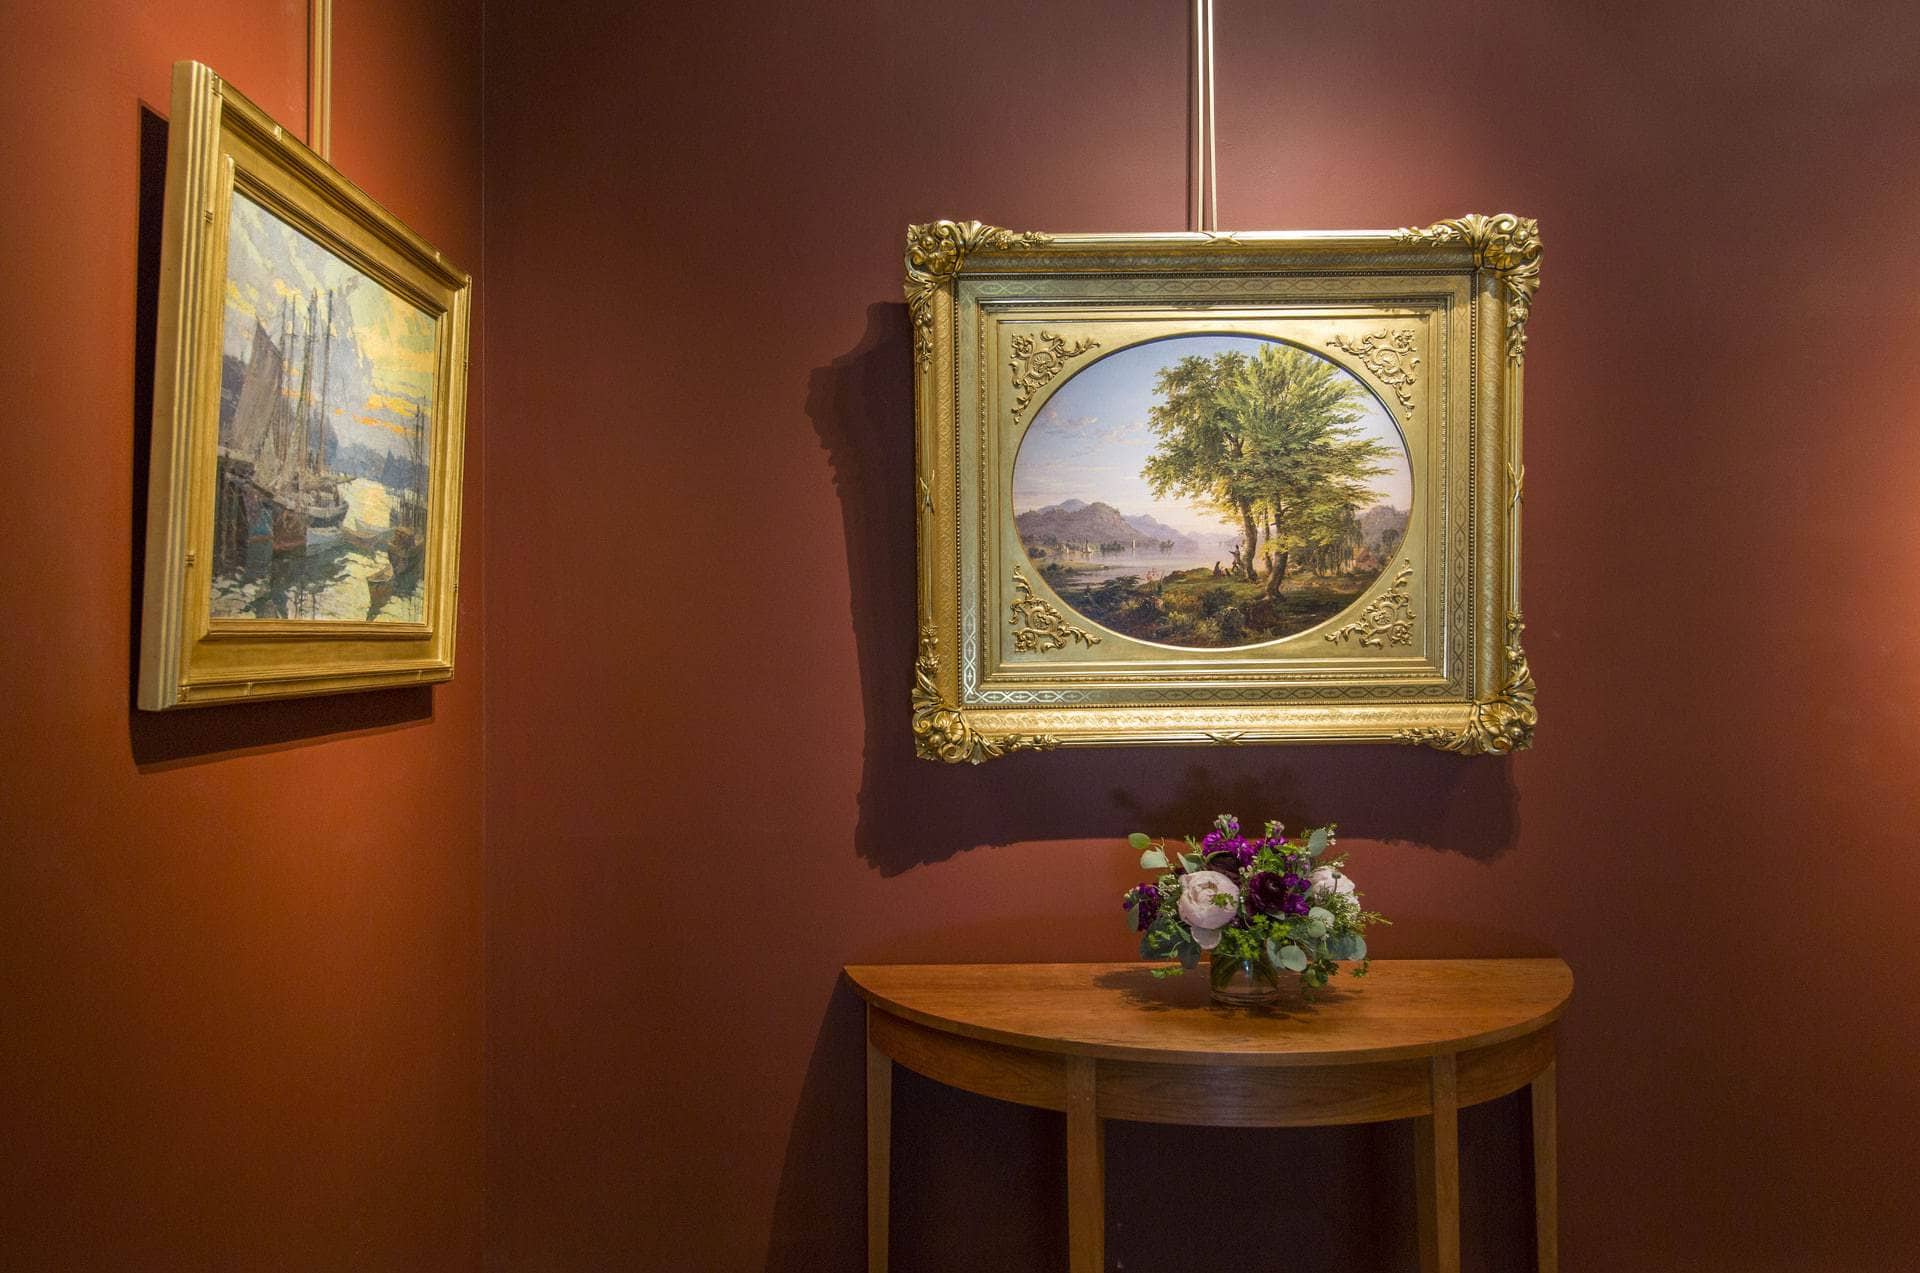 Mulhaupt and Cropsey at Questroyal Fine Art